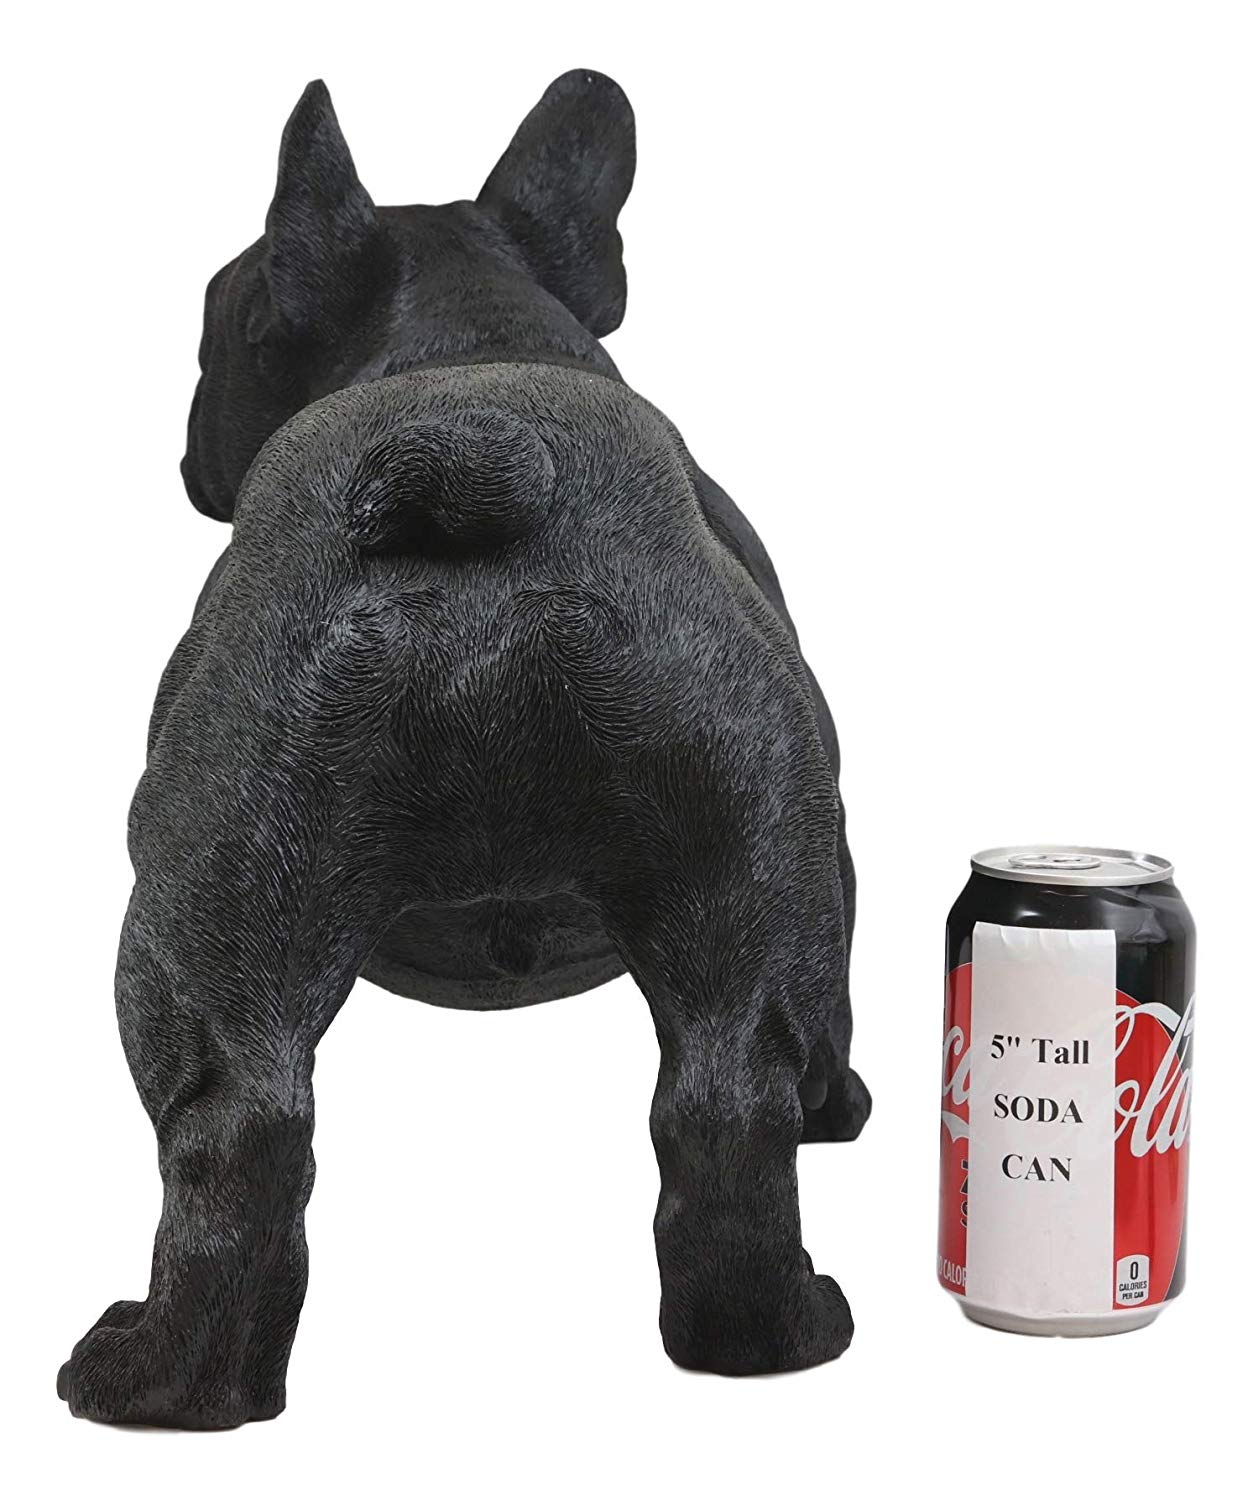 Ebros Adorable Large Lifelike Realistic Black French Bulldog Statue with Glass Eyes 19.5" Long Frenchie Figurine Pedigree Breed Animal Theme Dogs Puppy Puppies Sculpture - image 4 of 4